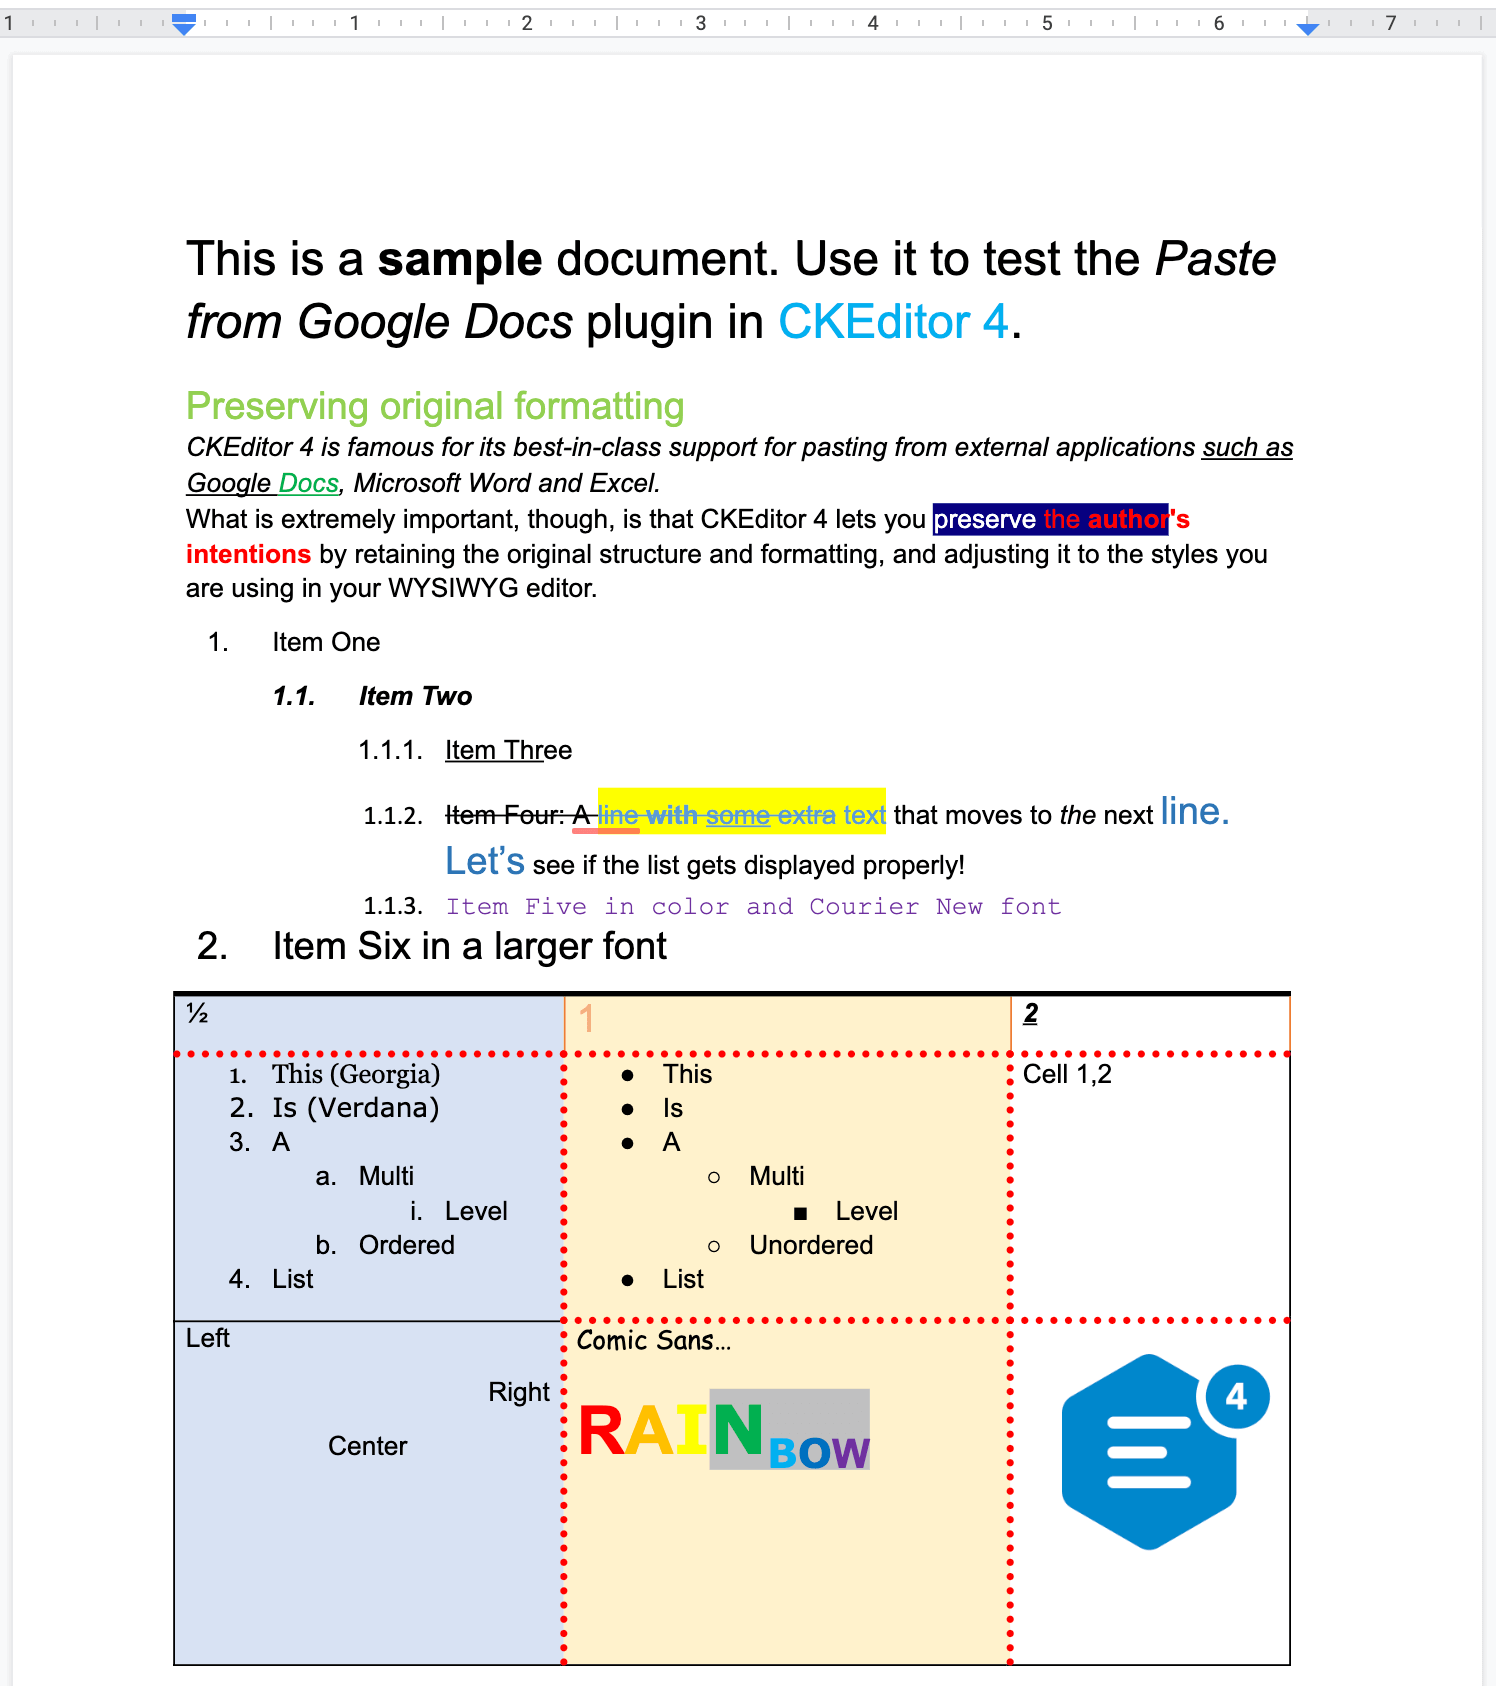 A sample Google Docs document with complex formatting and image.